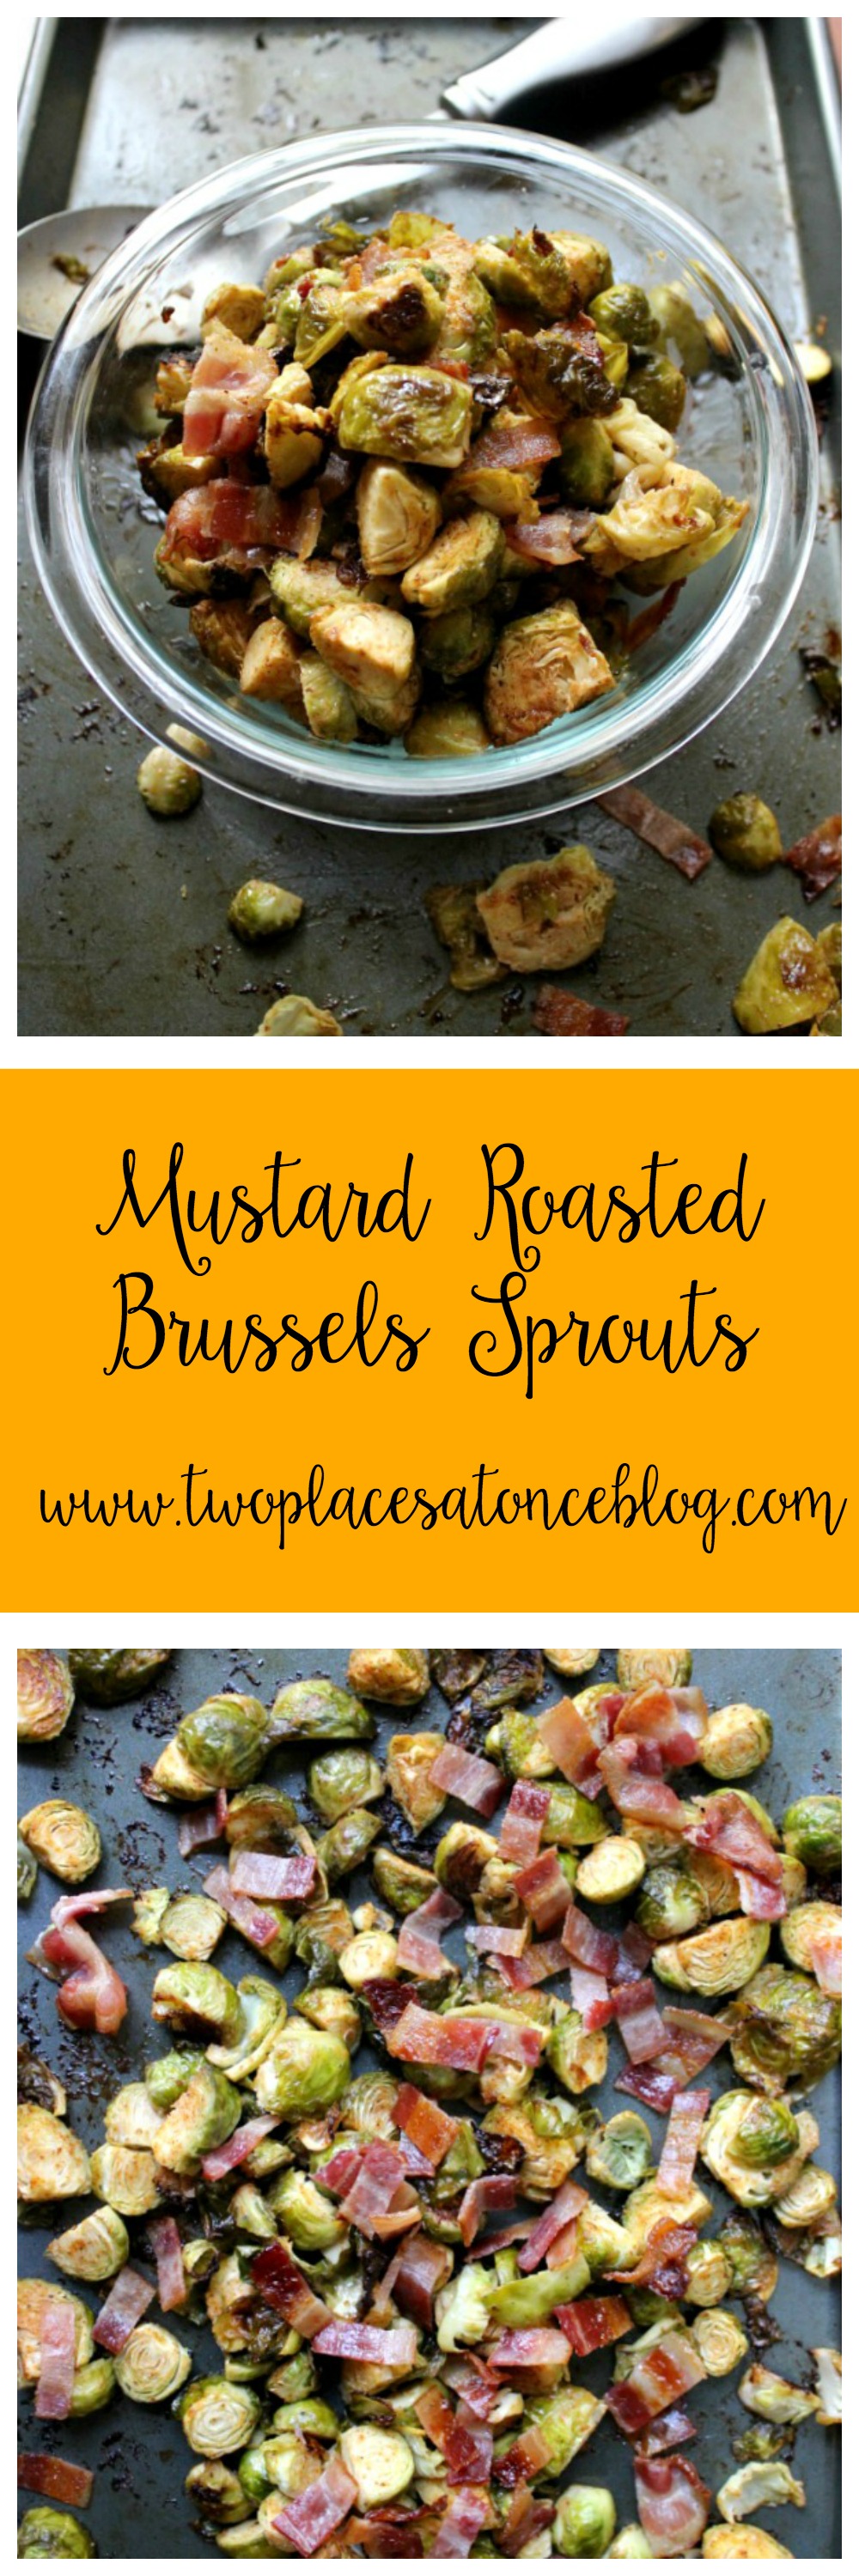 mustard-roasted-brussels-sprouts-pinterest